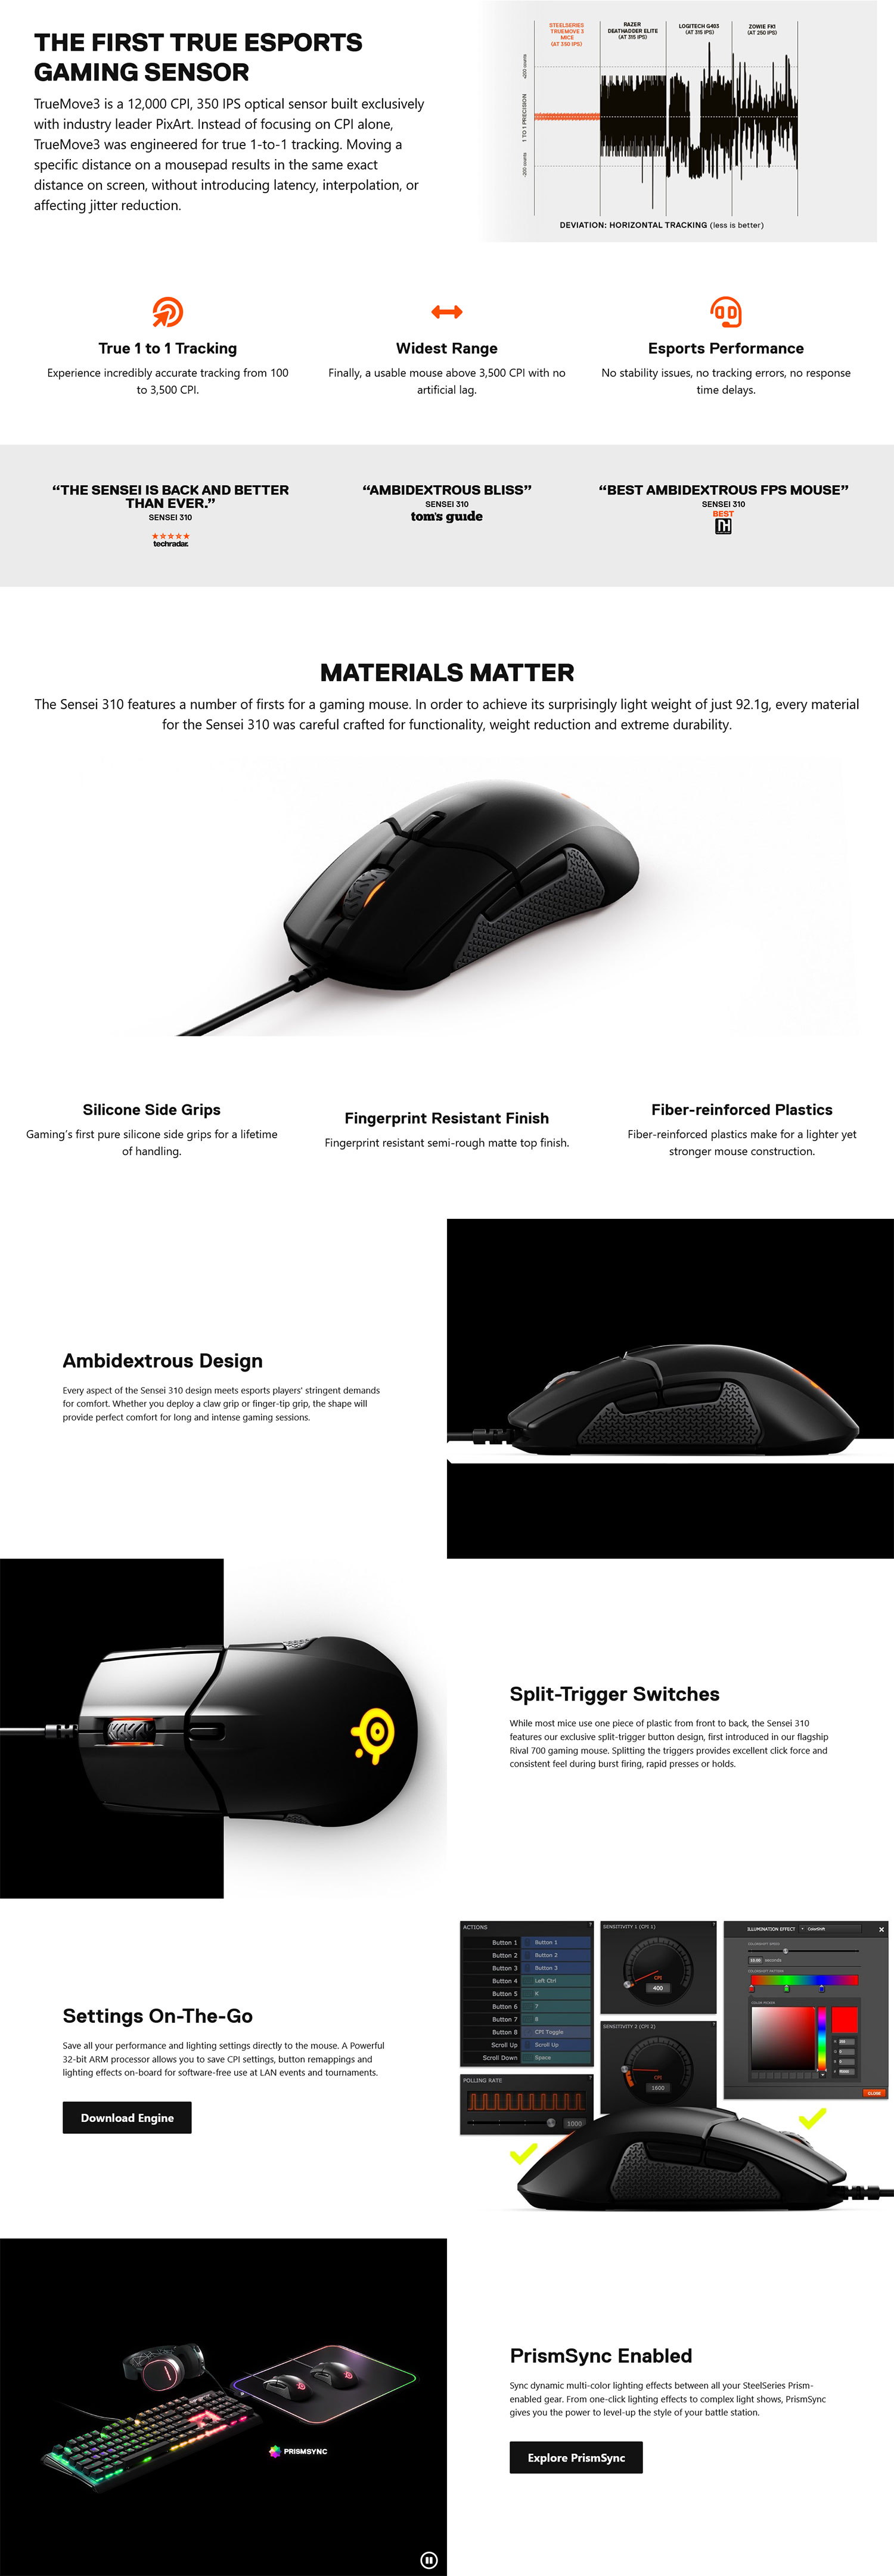 SteelSeries Sensei 310 Gaming Mouse Ambidextrous 62432 Features